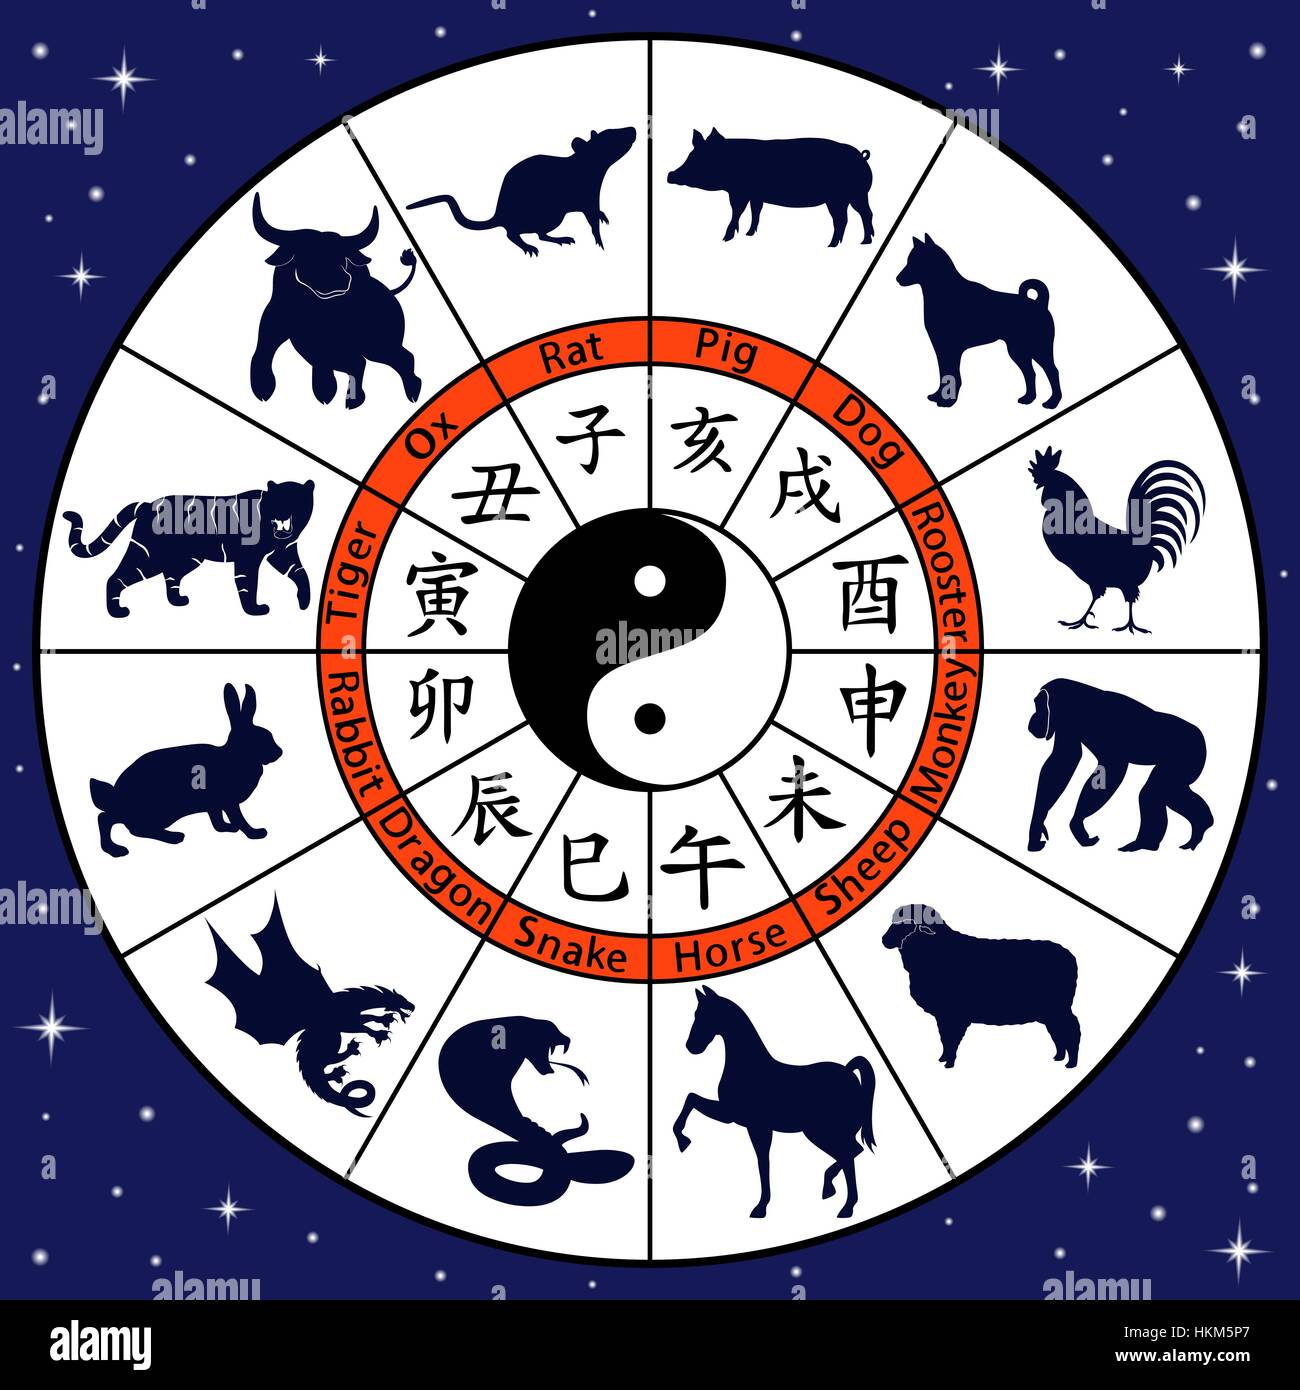 Animal symbols of Chinese zodiac on the circle with night starry sky around and with Yin and Yang in the centre, vector illustration Stock Vector